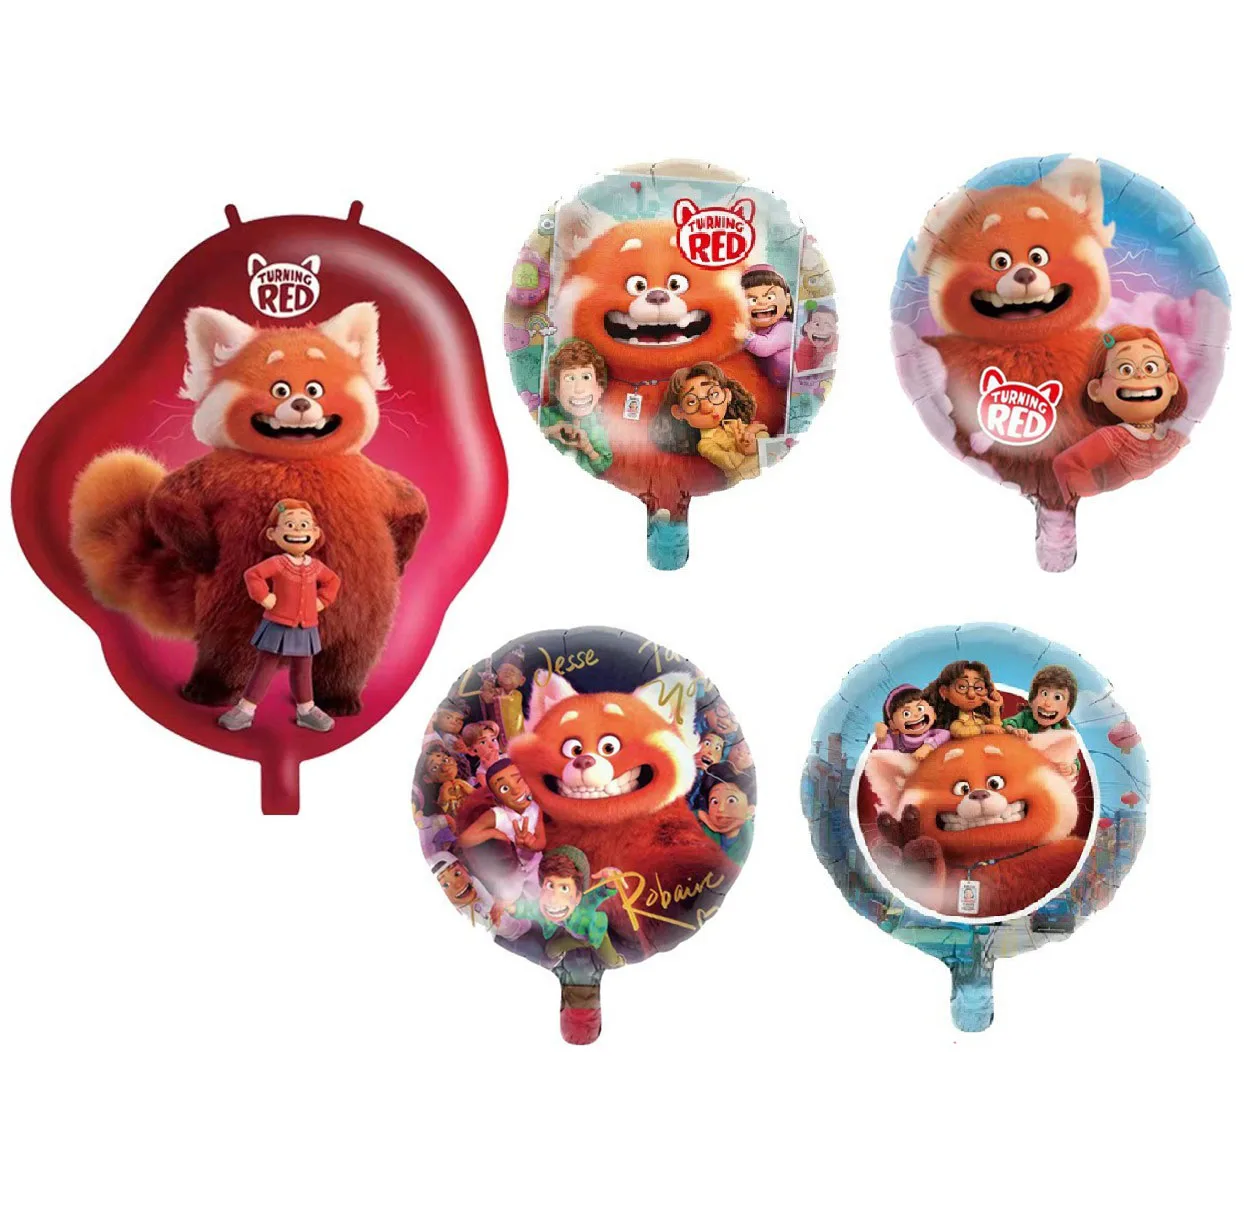 Turning Red Balloon Cartoon Animation Aluminum Film Balloon Children's Toys  Birthday Party Decoration For Home - Ballons & Accessories - AliExpress